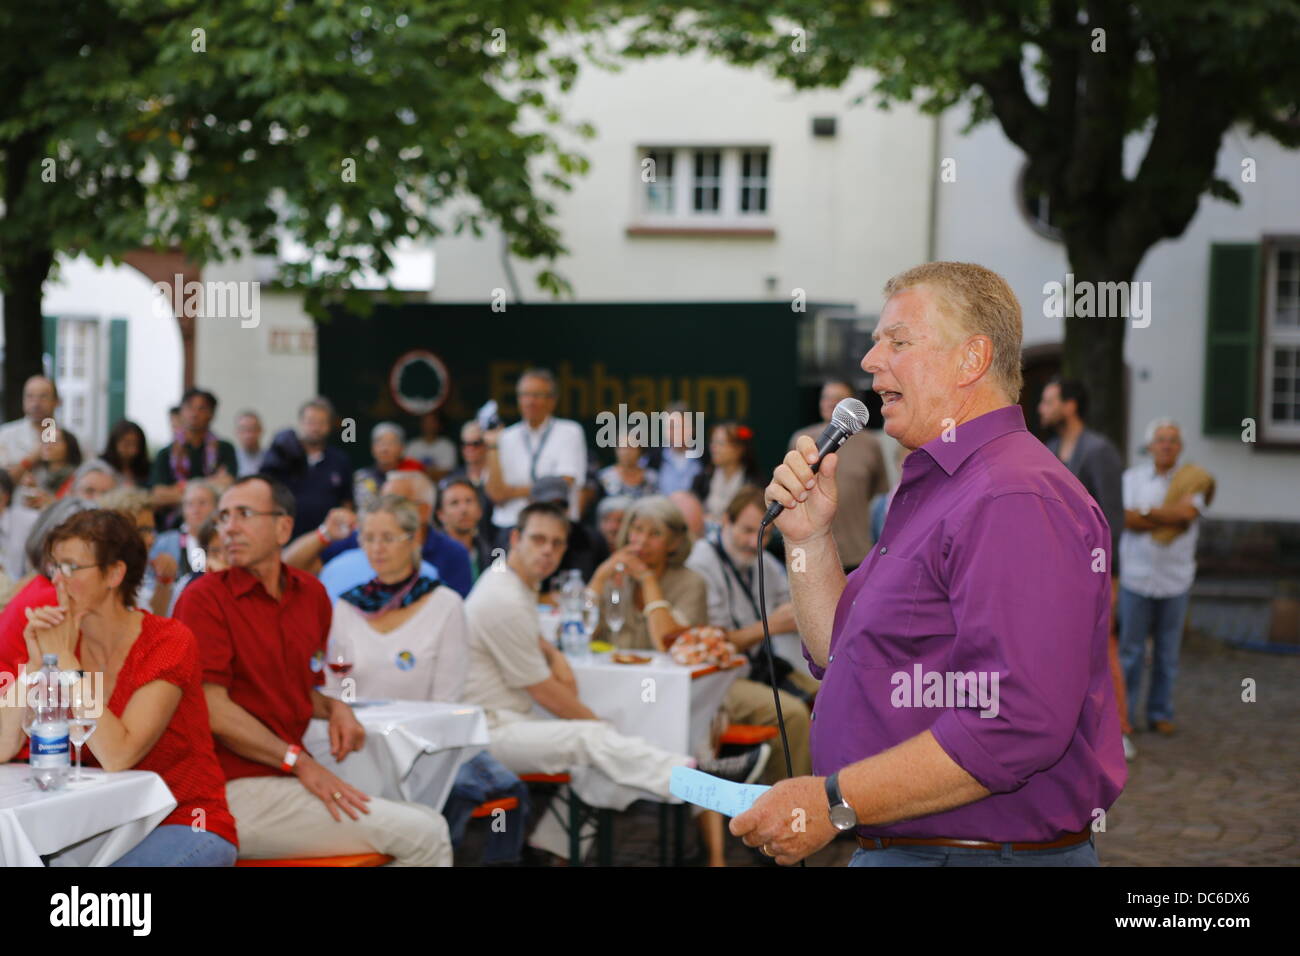 Worms, Germany. 9th August 2013. The Lord Mayor of Worms, Michael Kissel addresses the audience. The Lord Mayor of Worms, Michael Kissel, opened the Jazz & Joy Festival 2013 with a traditional keg-tapping ceremony. The Jazz & Joy Festival runs for three days in the shadow of the Cathedral of Worms. Credit:  Michael Debets/Alamy Live News Stock Photo